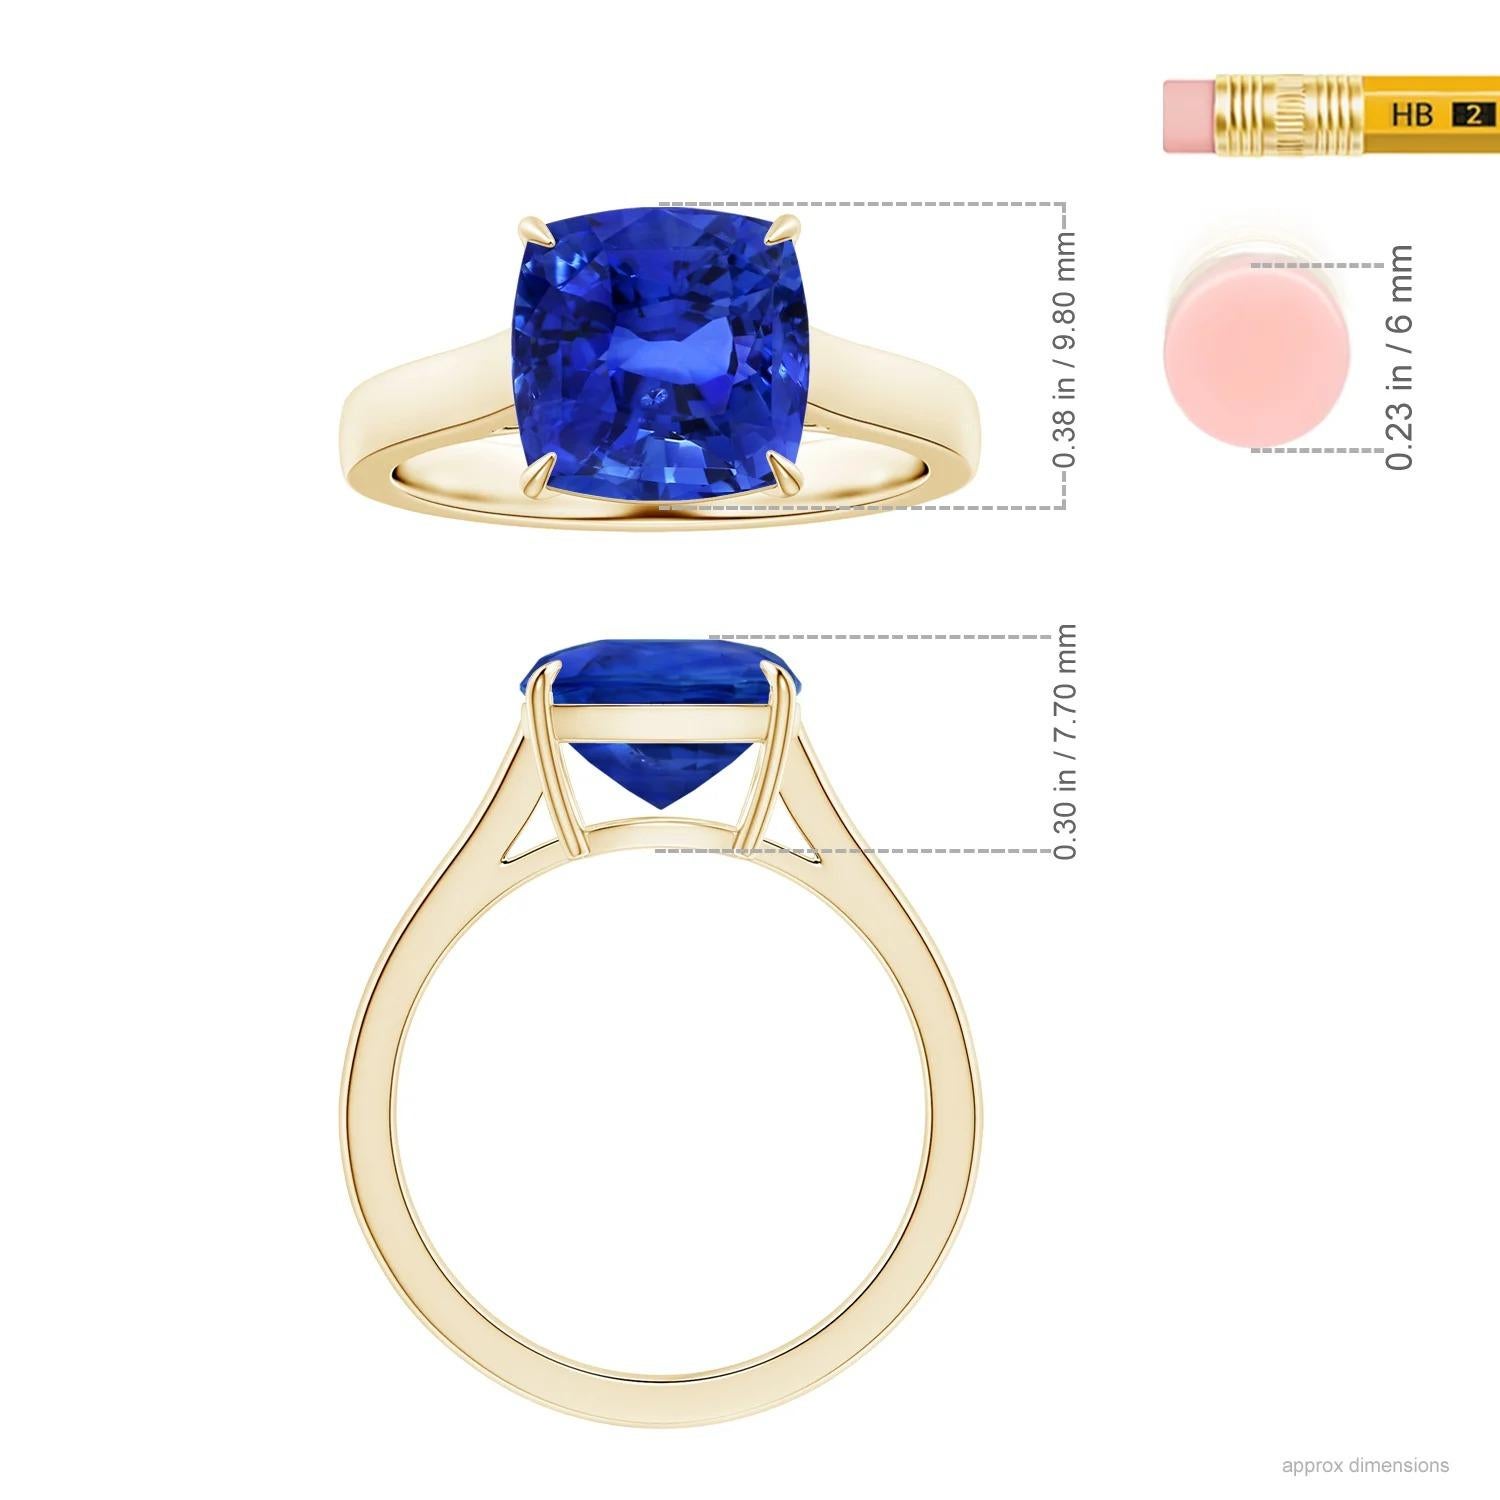 For Sale:  Angara GIA Certified Cushion Blue Sapphire Solitaire Ring in Yellow Gold 5